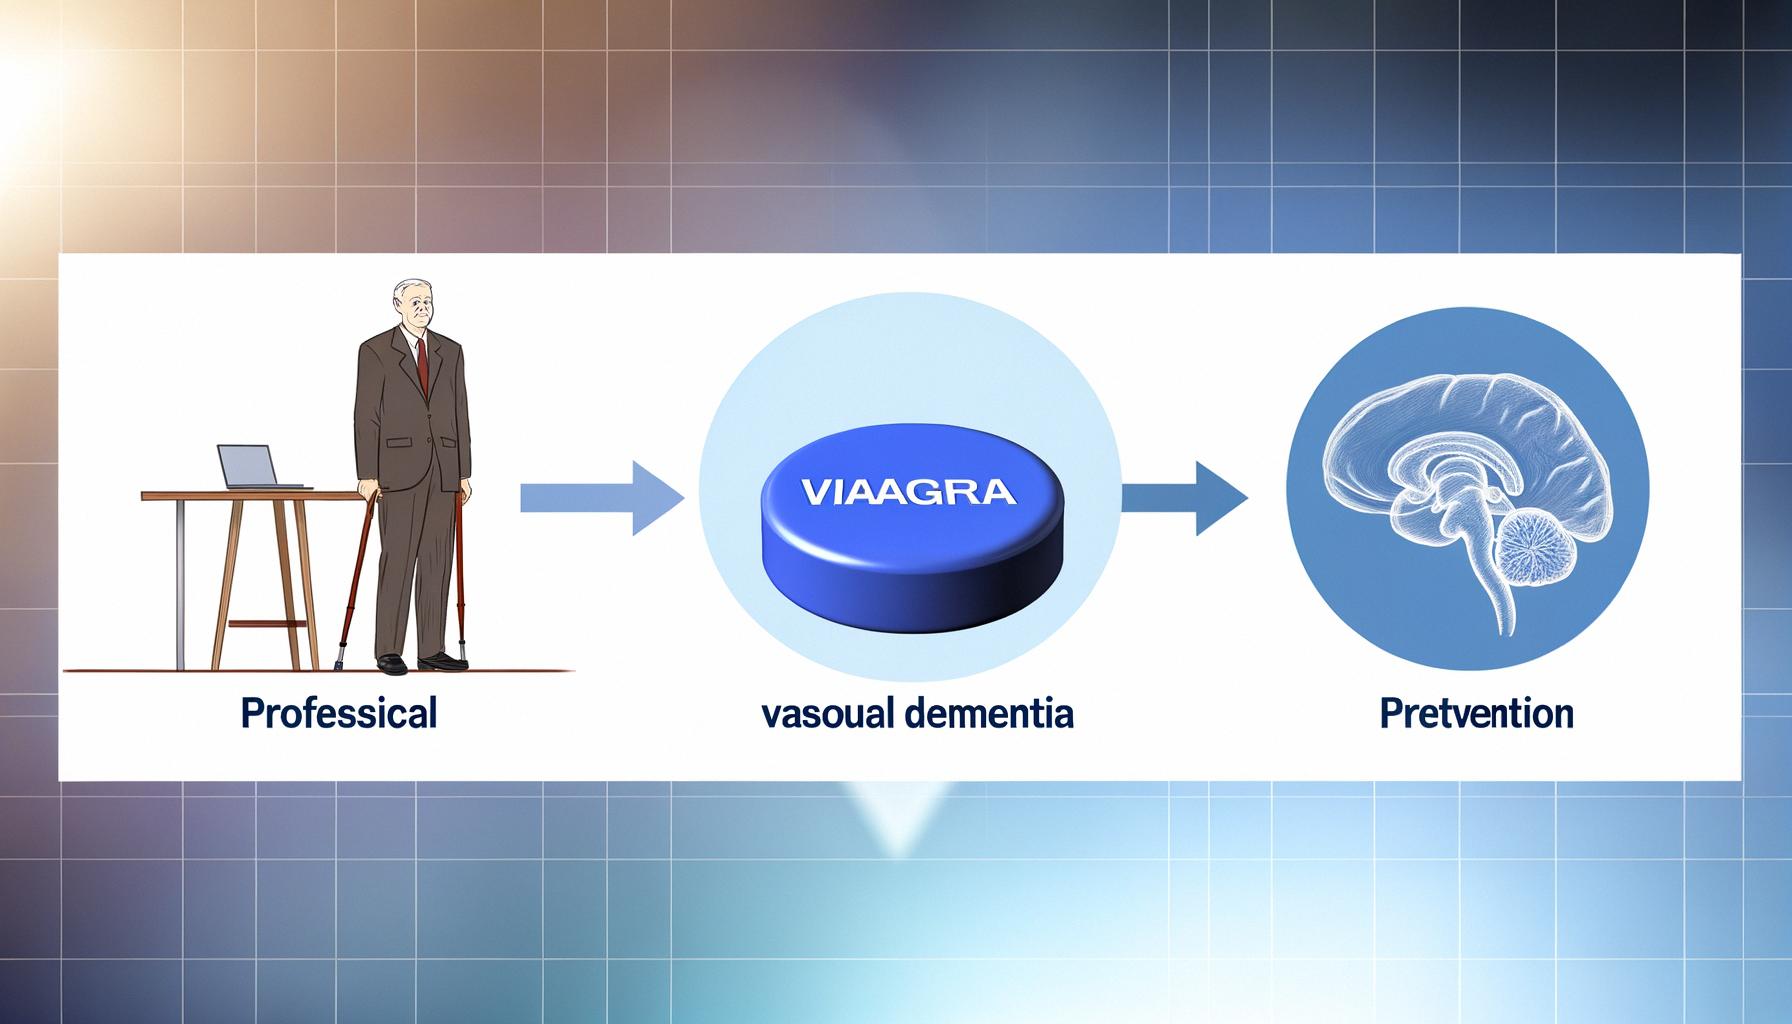 Viagra shown to improve brain blood flow and potentially prevent vascular dementia.